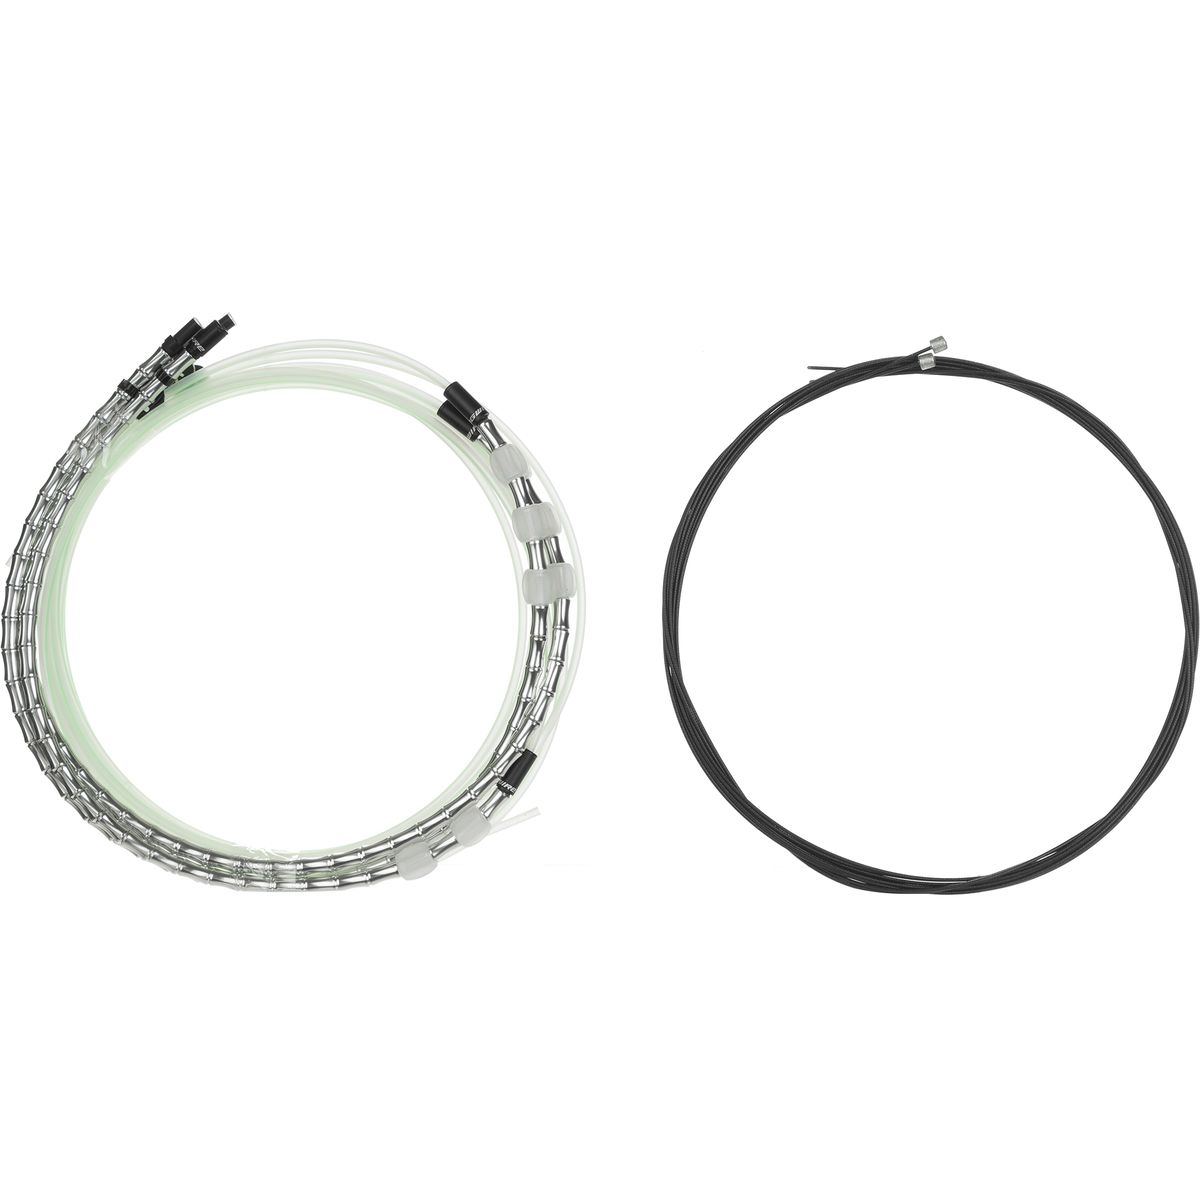 Jagwire Road Elite Link Shift Cable Kit